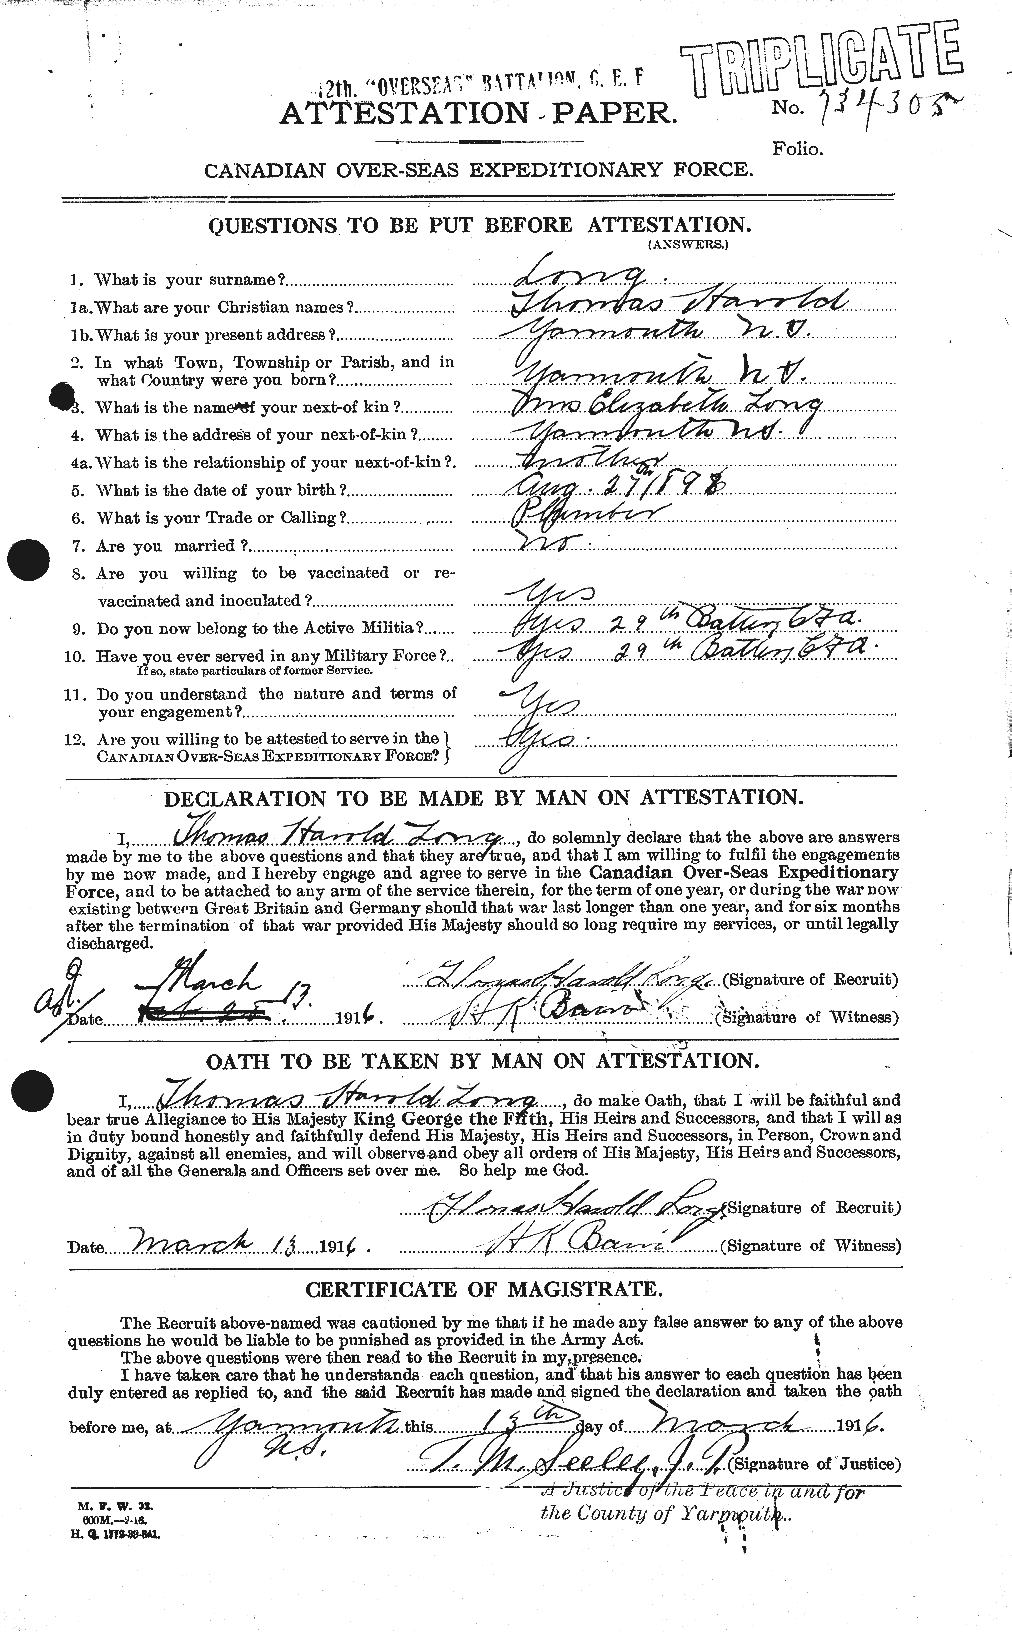 Personnel Records of the First World War - CEF 468529a